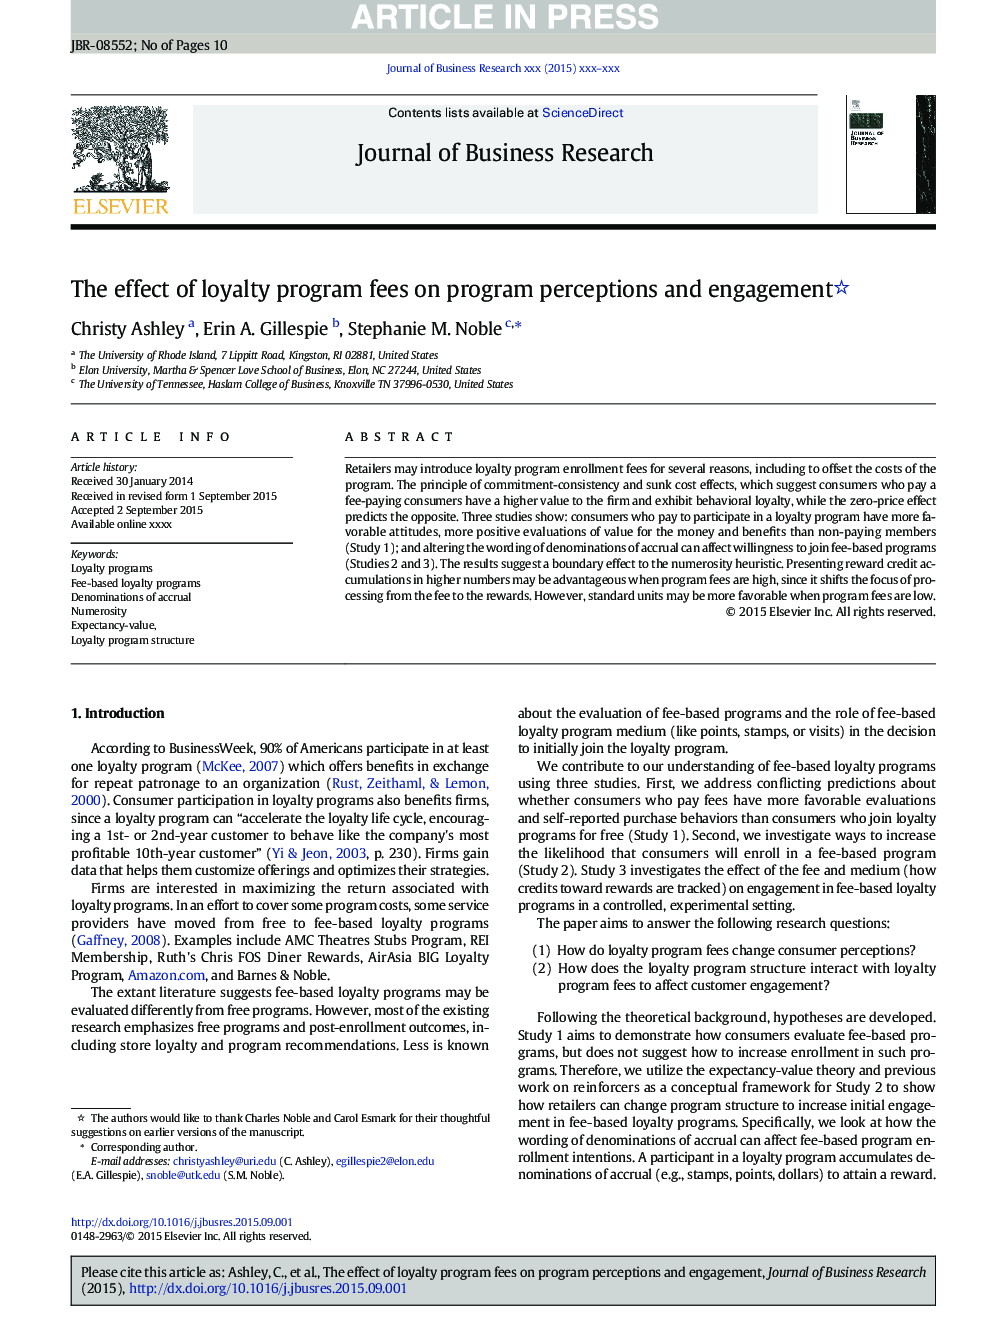 The effect of loyalty program fees on program perceptions and engagement